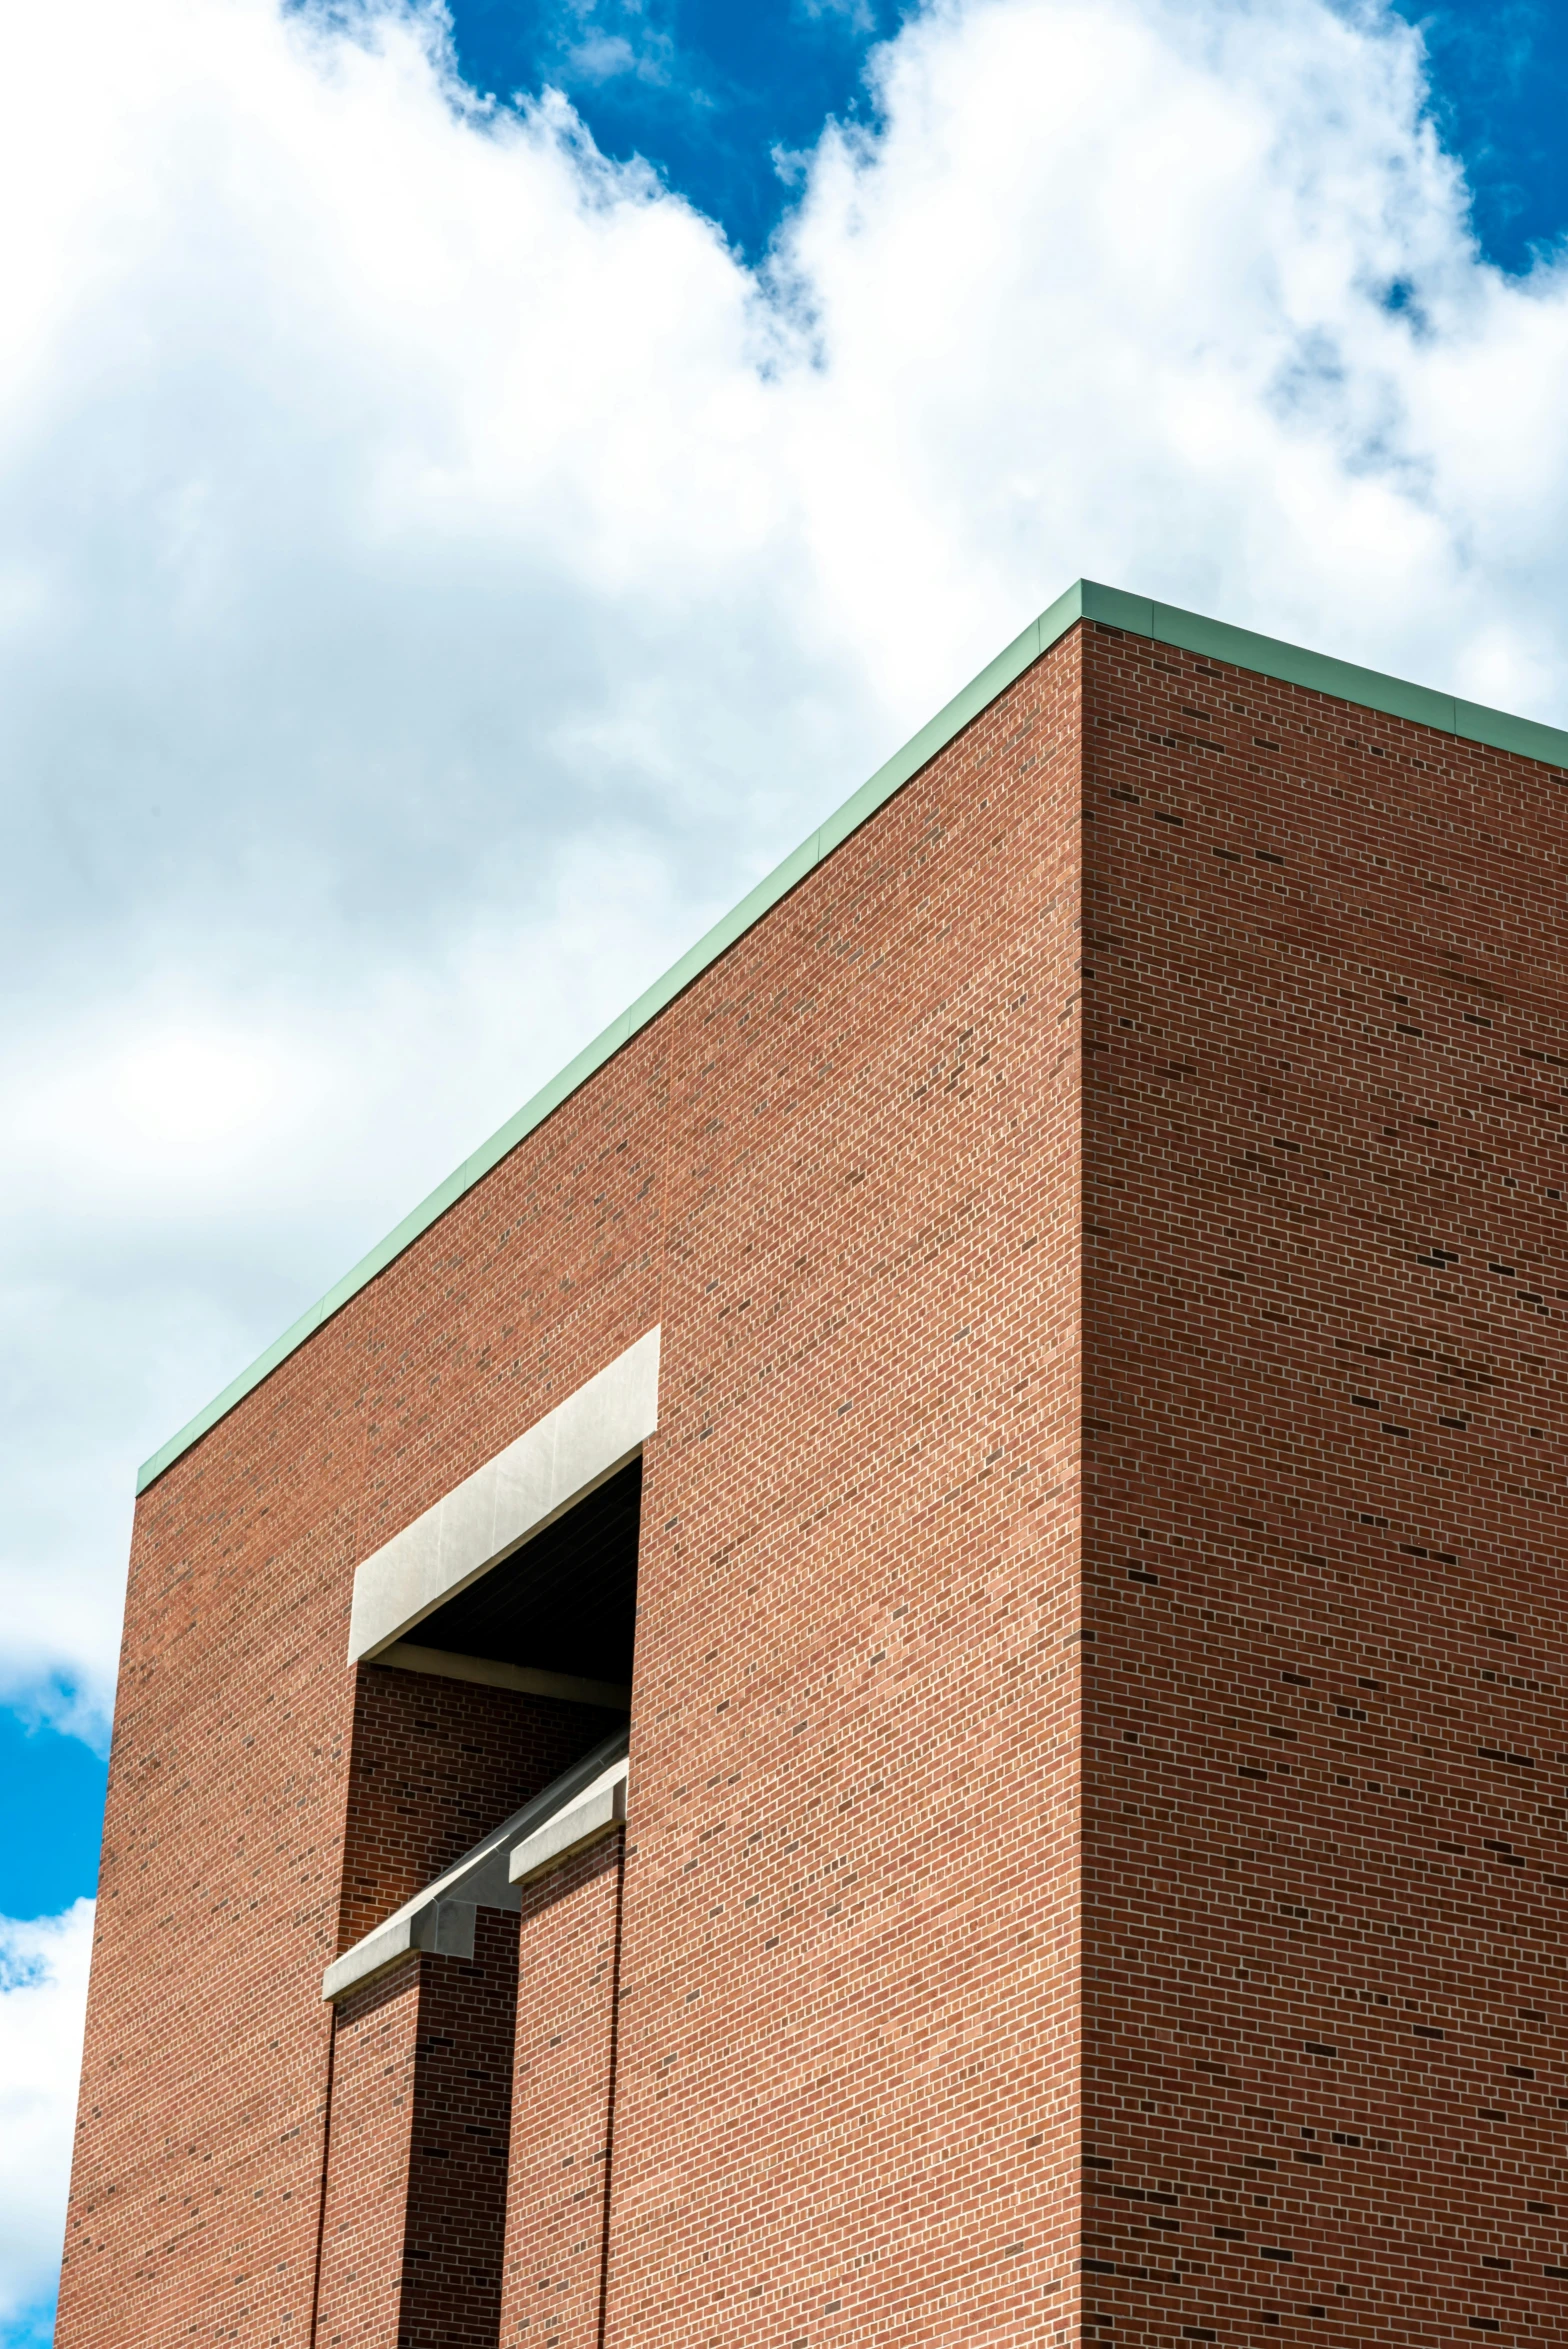 an angled brick building with a sky background